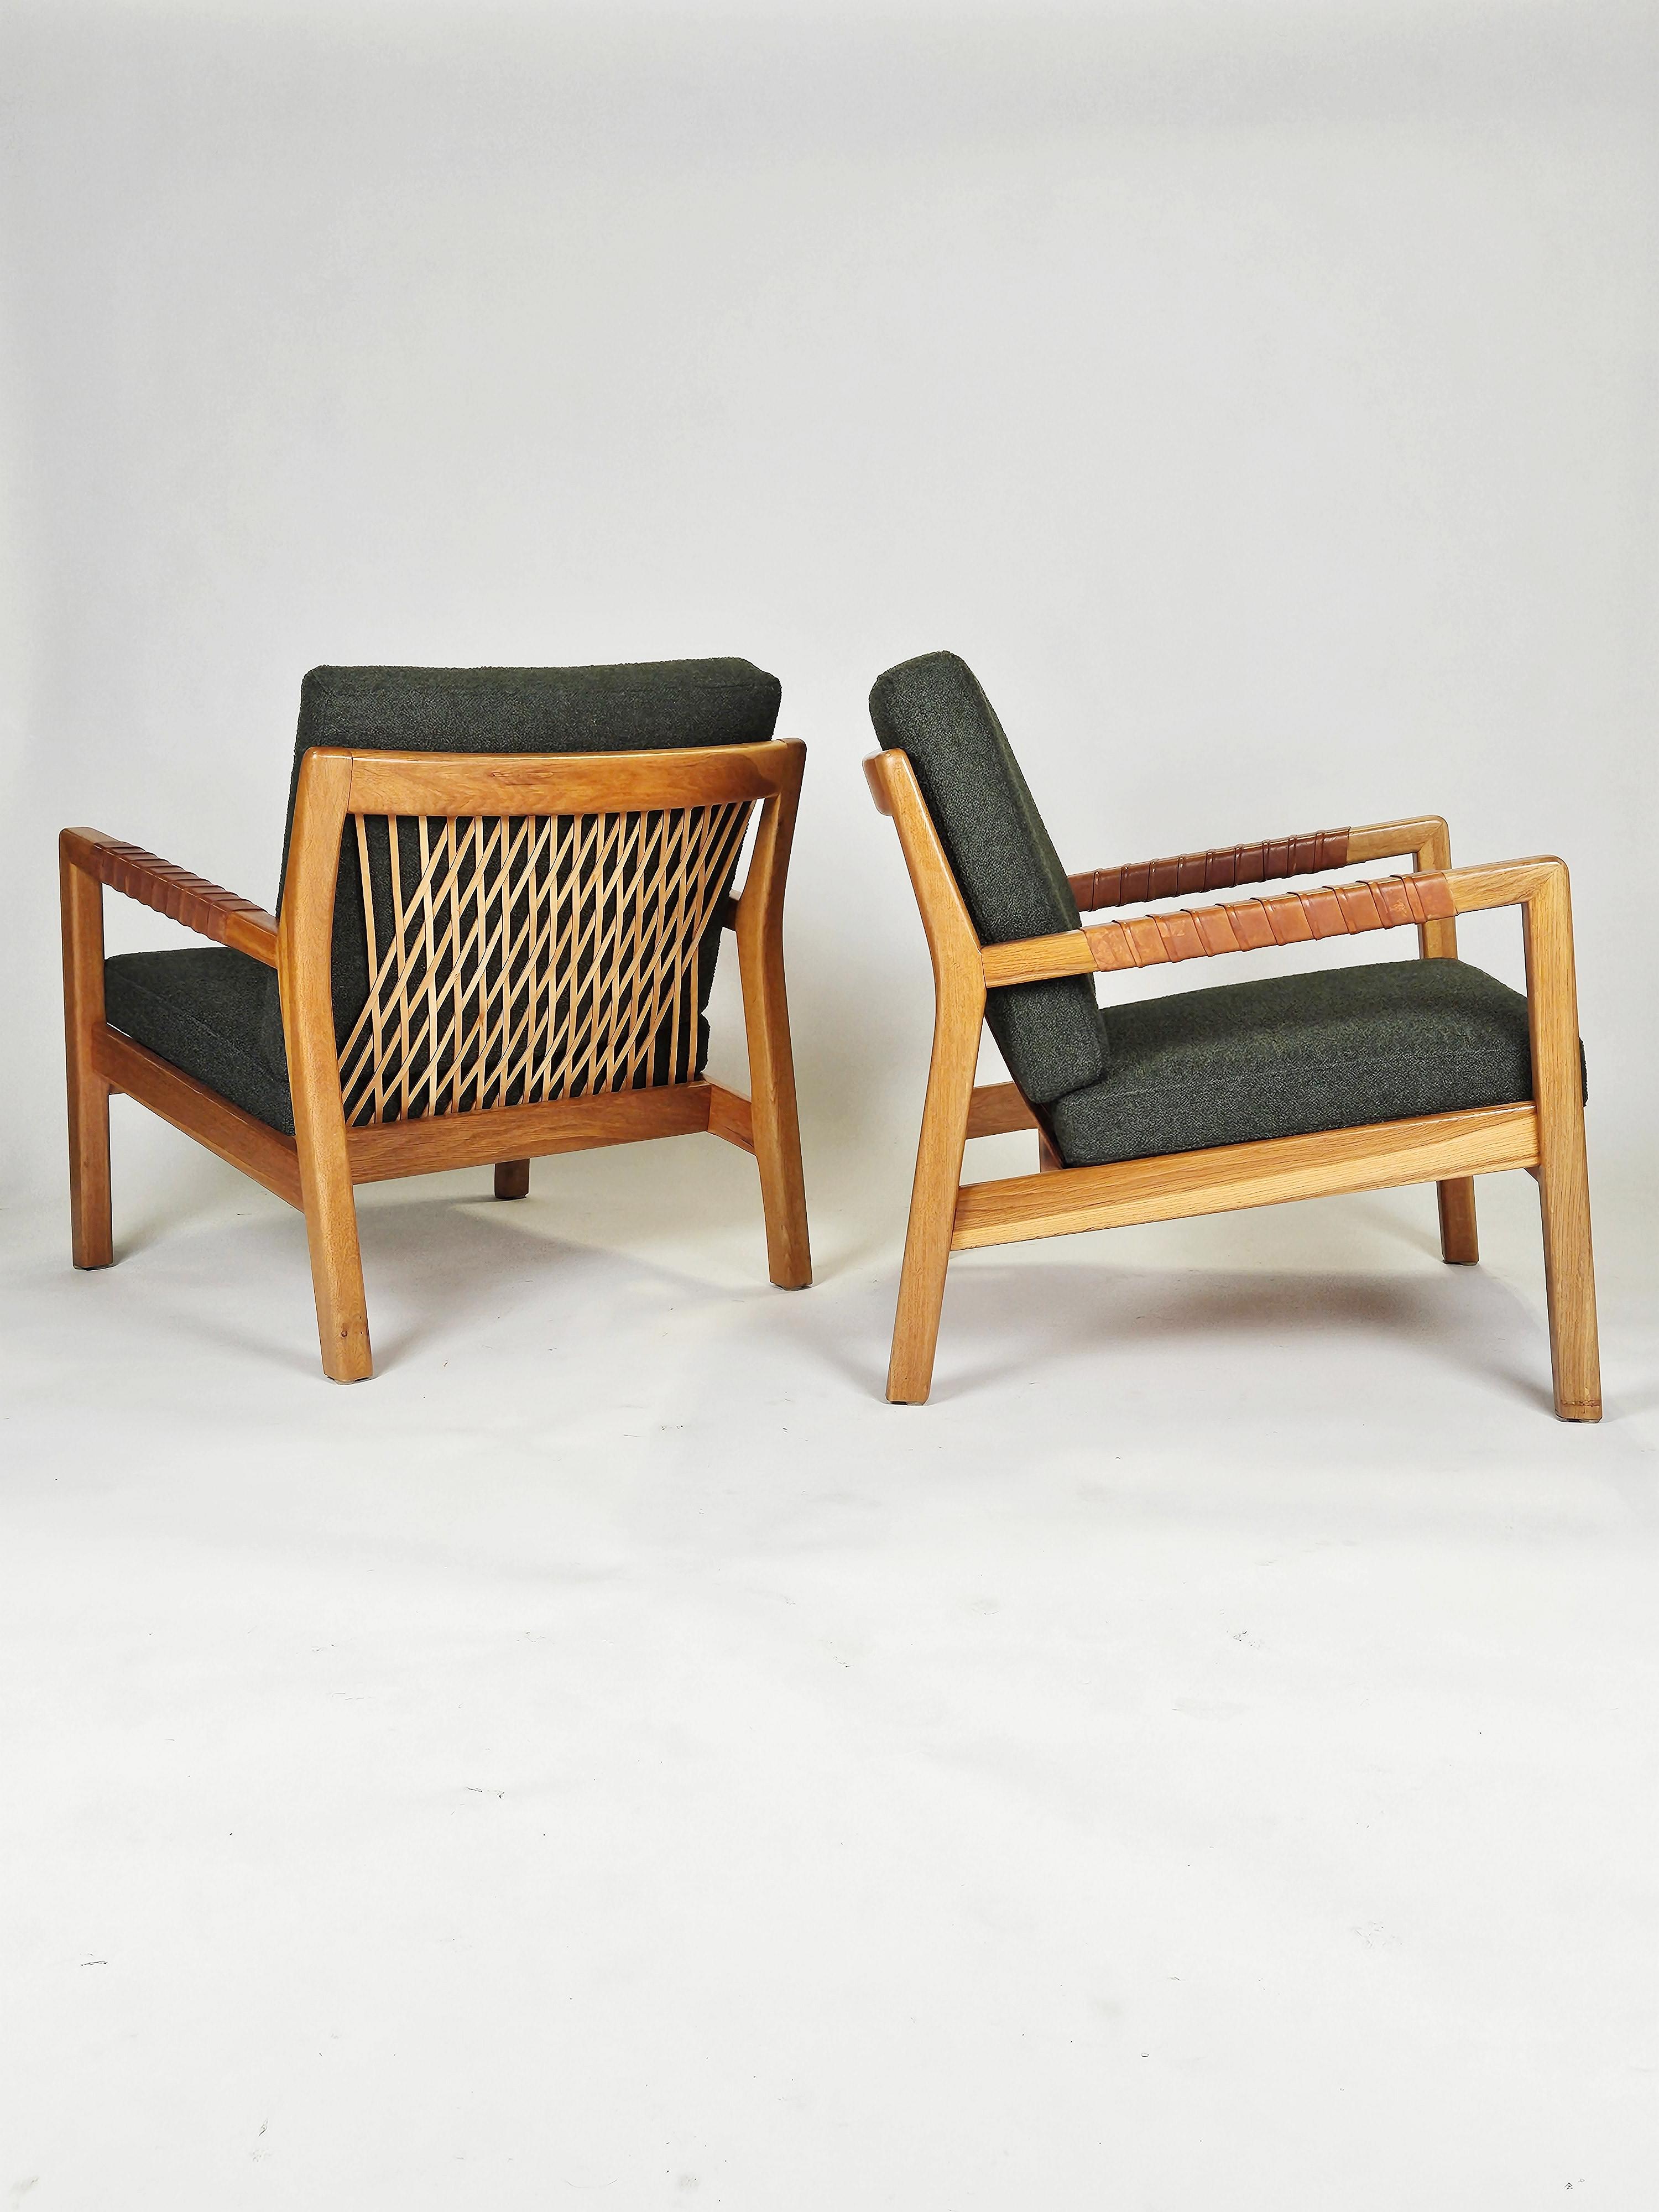 Rare pair of easy chairs designed by Carl Gustaf Hiort af Ornäs and produced by Puunveisto, Finland, during the 1950s. 

Made in ash with beautiful details of leather. Newly upholstered in high quality bouclé fabric in green. 

